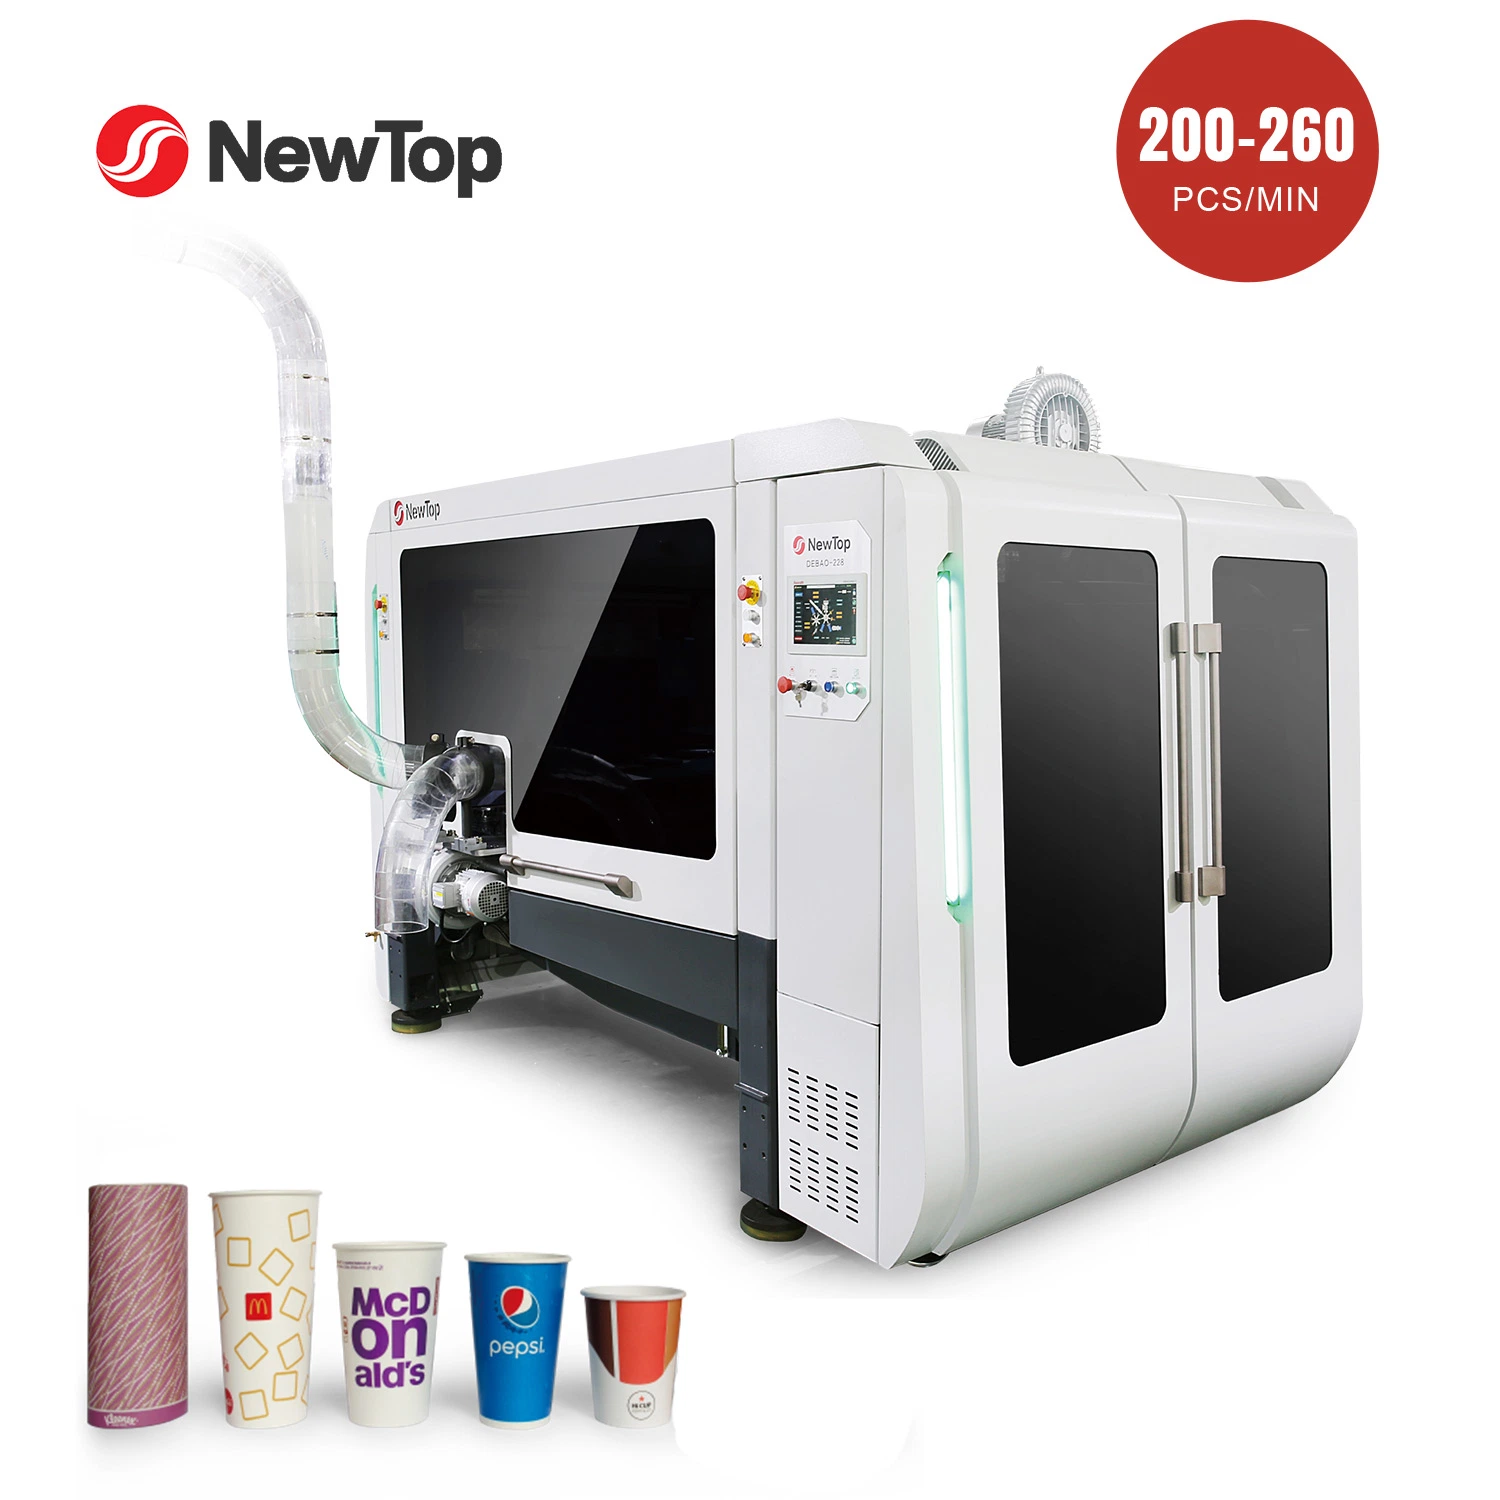 Newtop-258s Horizontal 200-260PCS/Min Paper Cup Forming Machine for Large Order